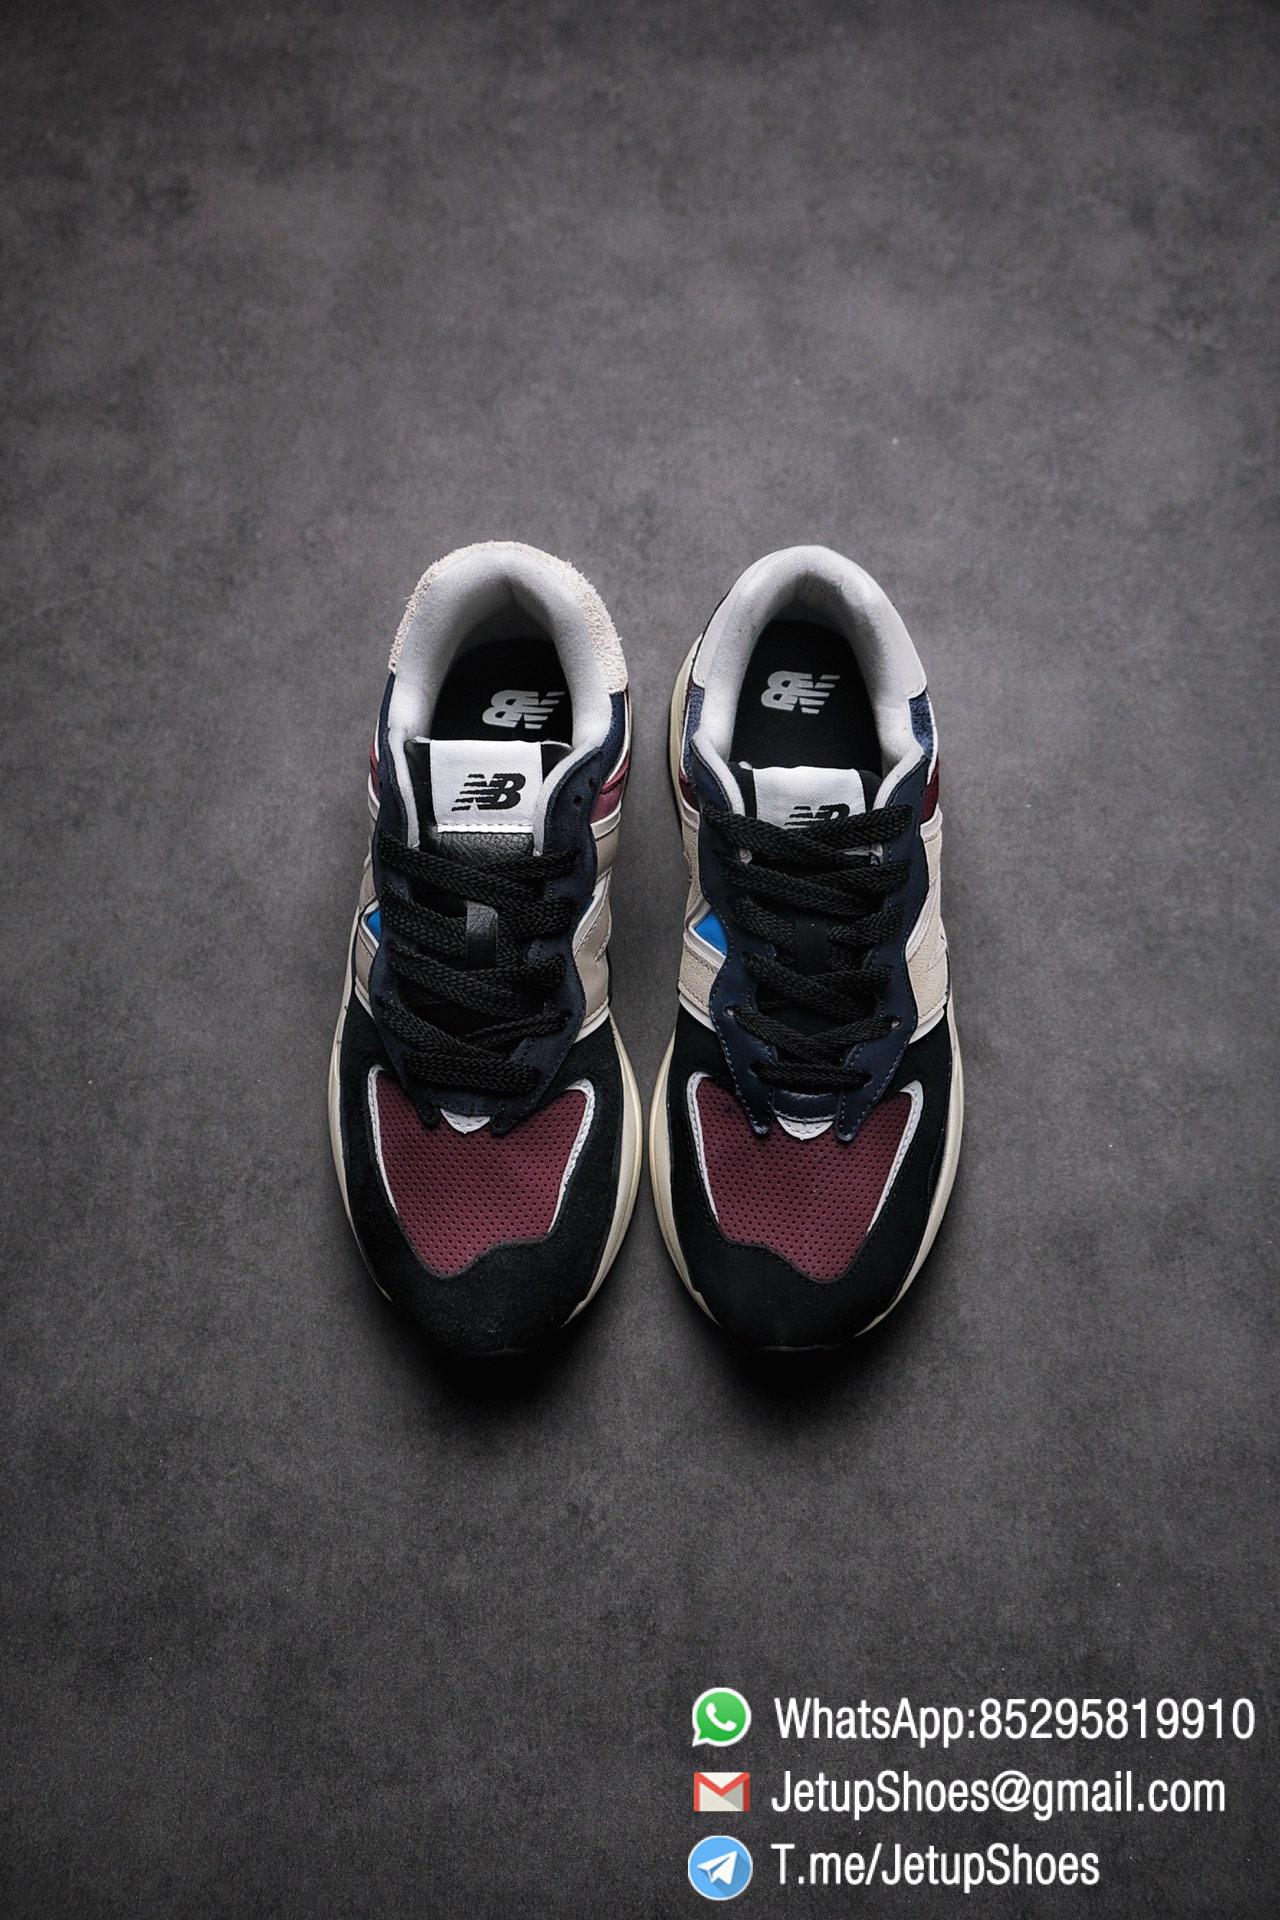 Best Replica New Balance 57 40 Navy Burgundy SKU M5740TB Navy And Burgundy Panels Appear Top Quality 02